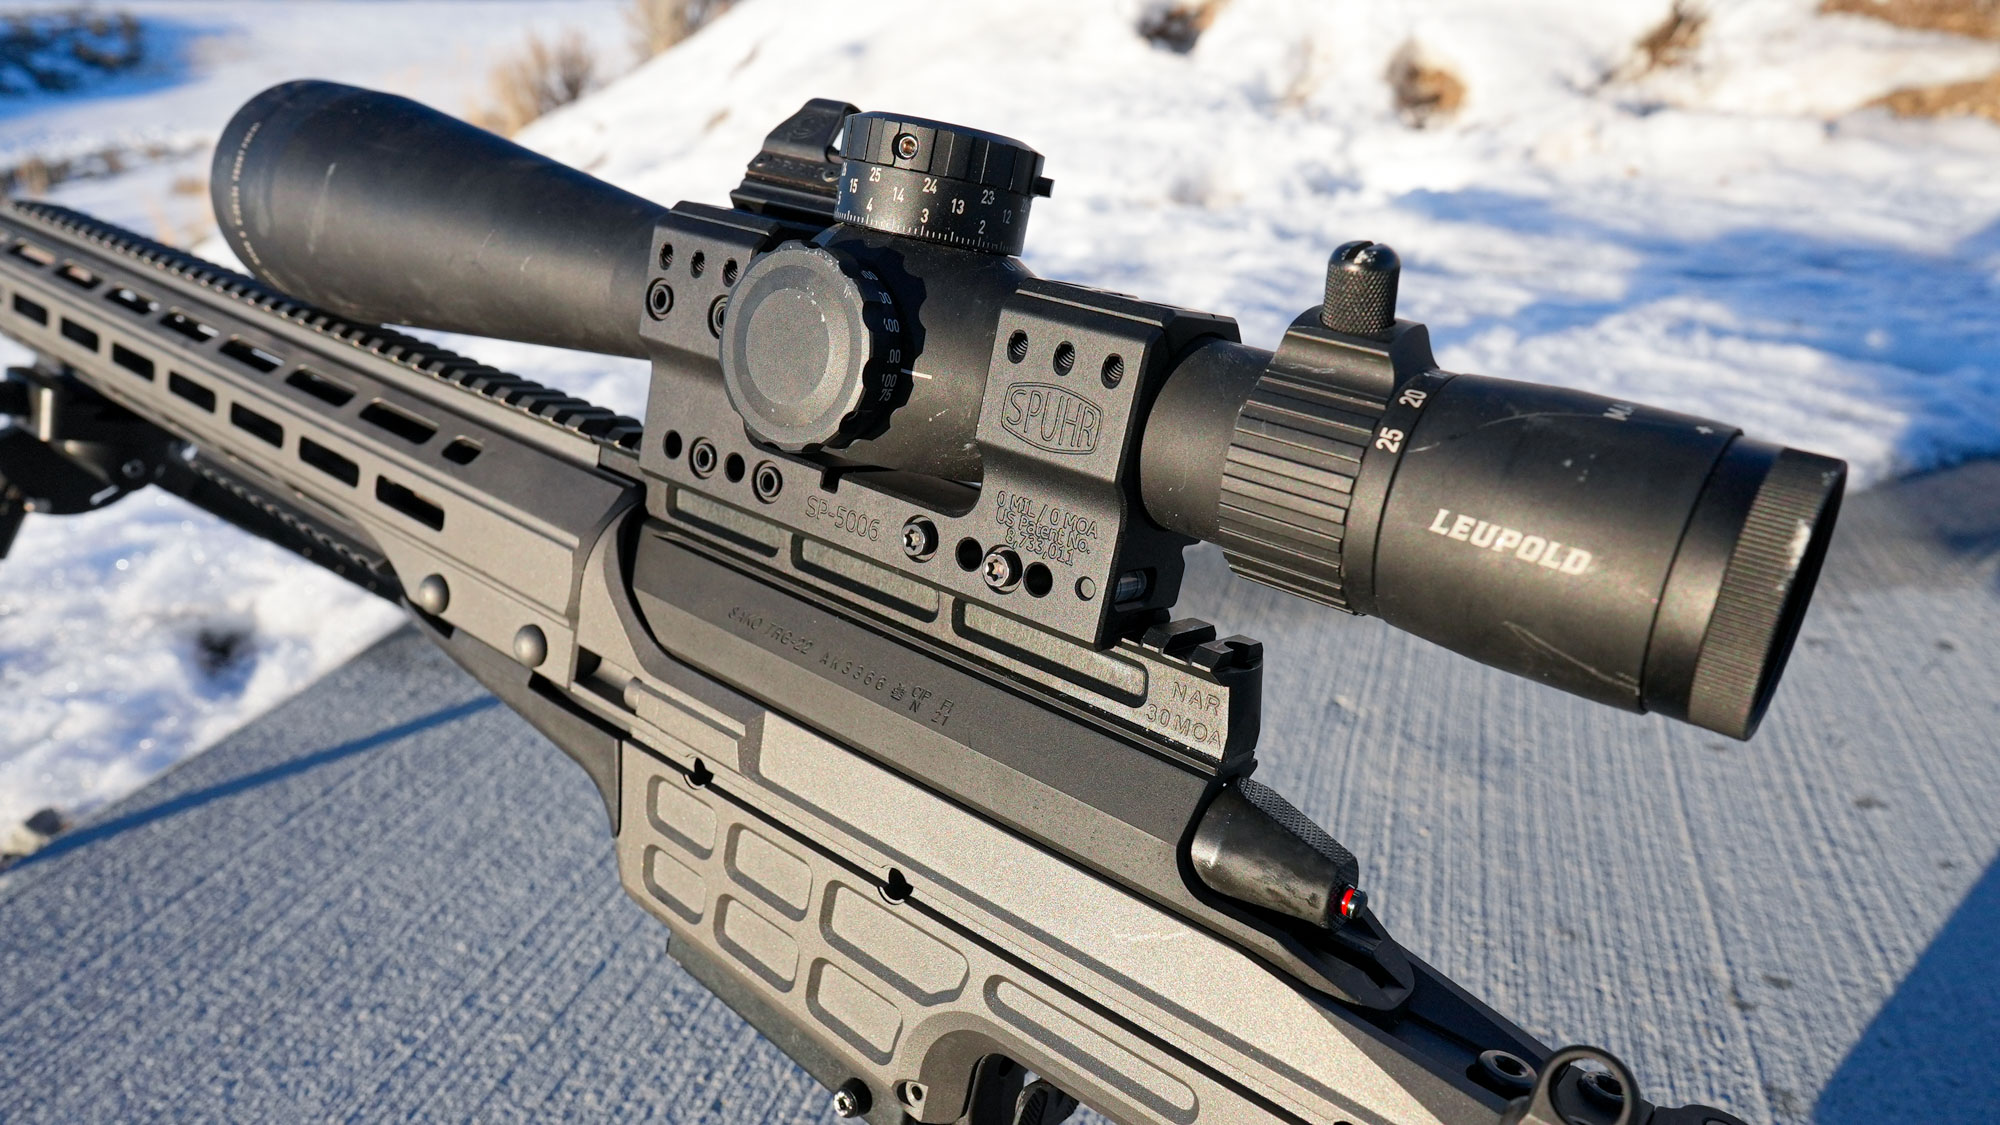 A Leupold Mark 5HD 5-25x56 in a 
Spuhr mount was used in this evaluation. 